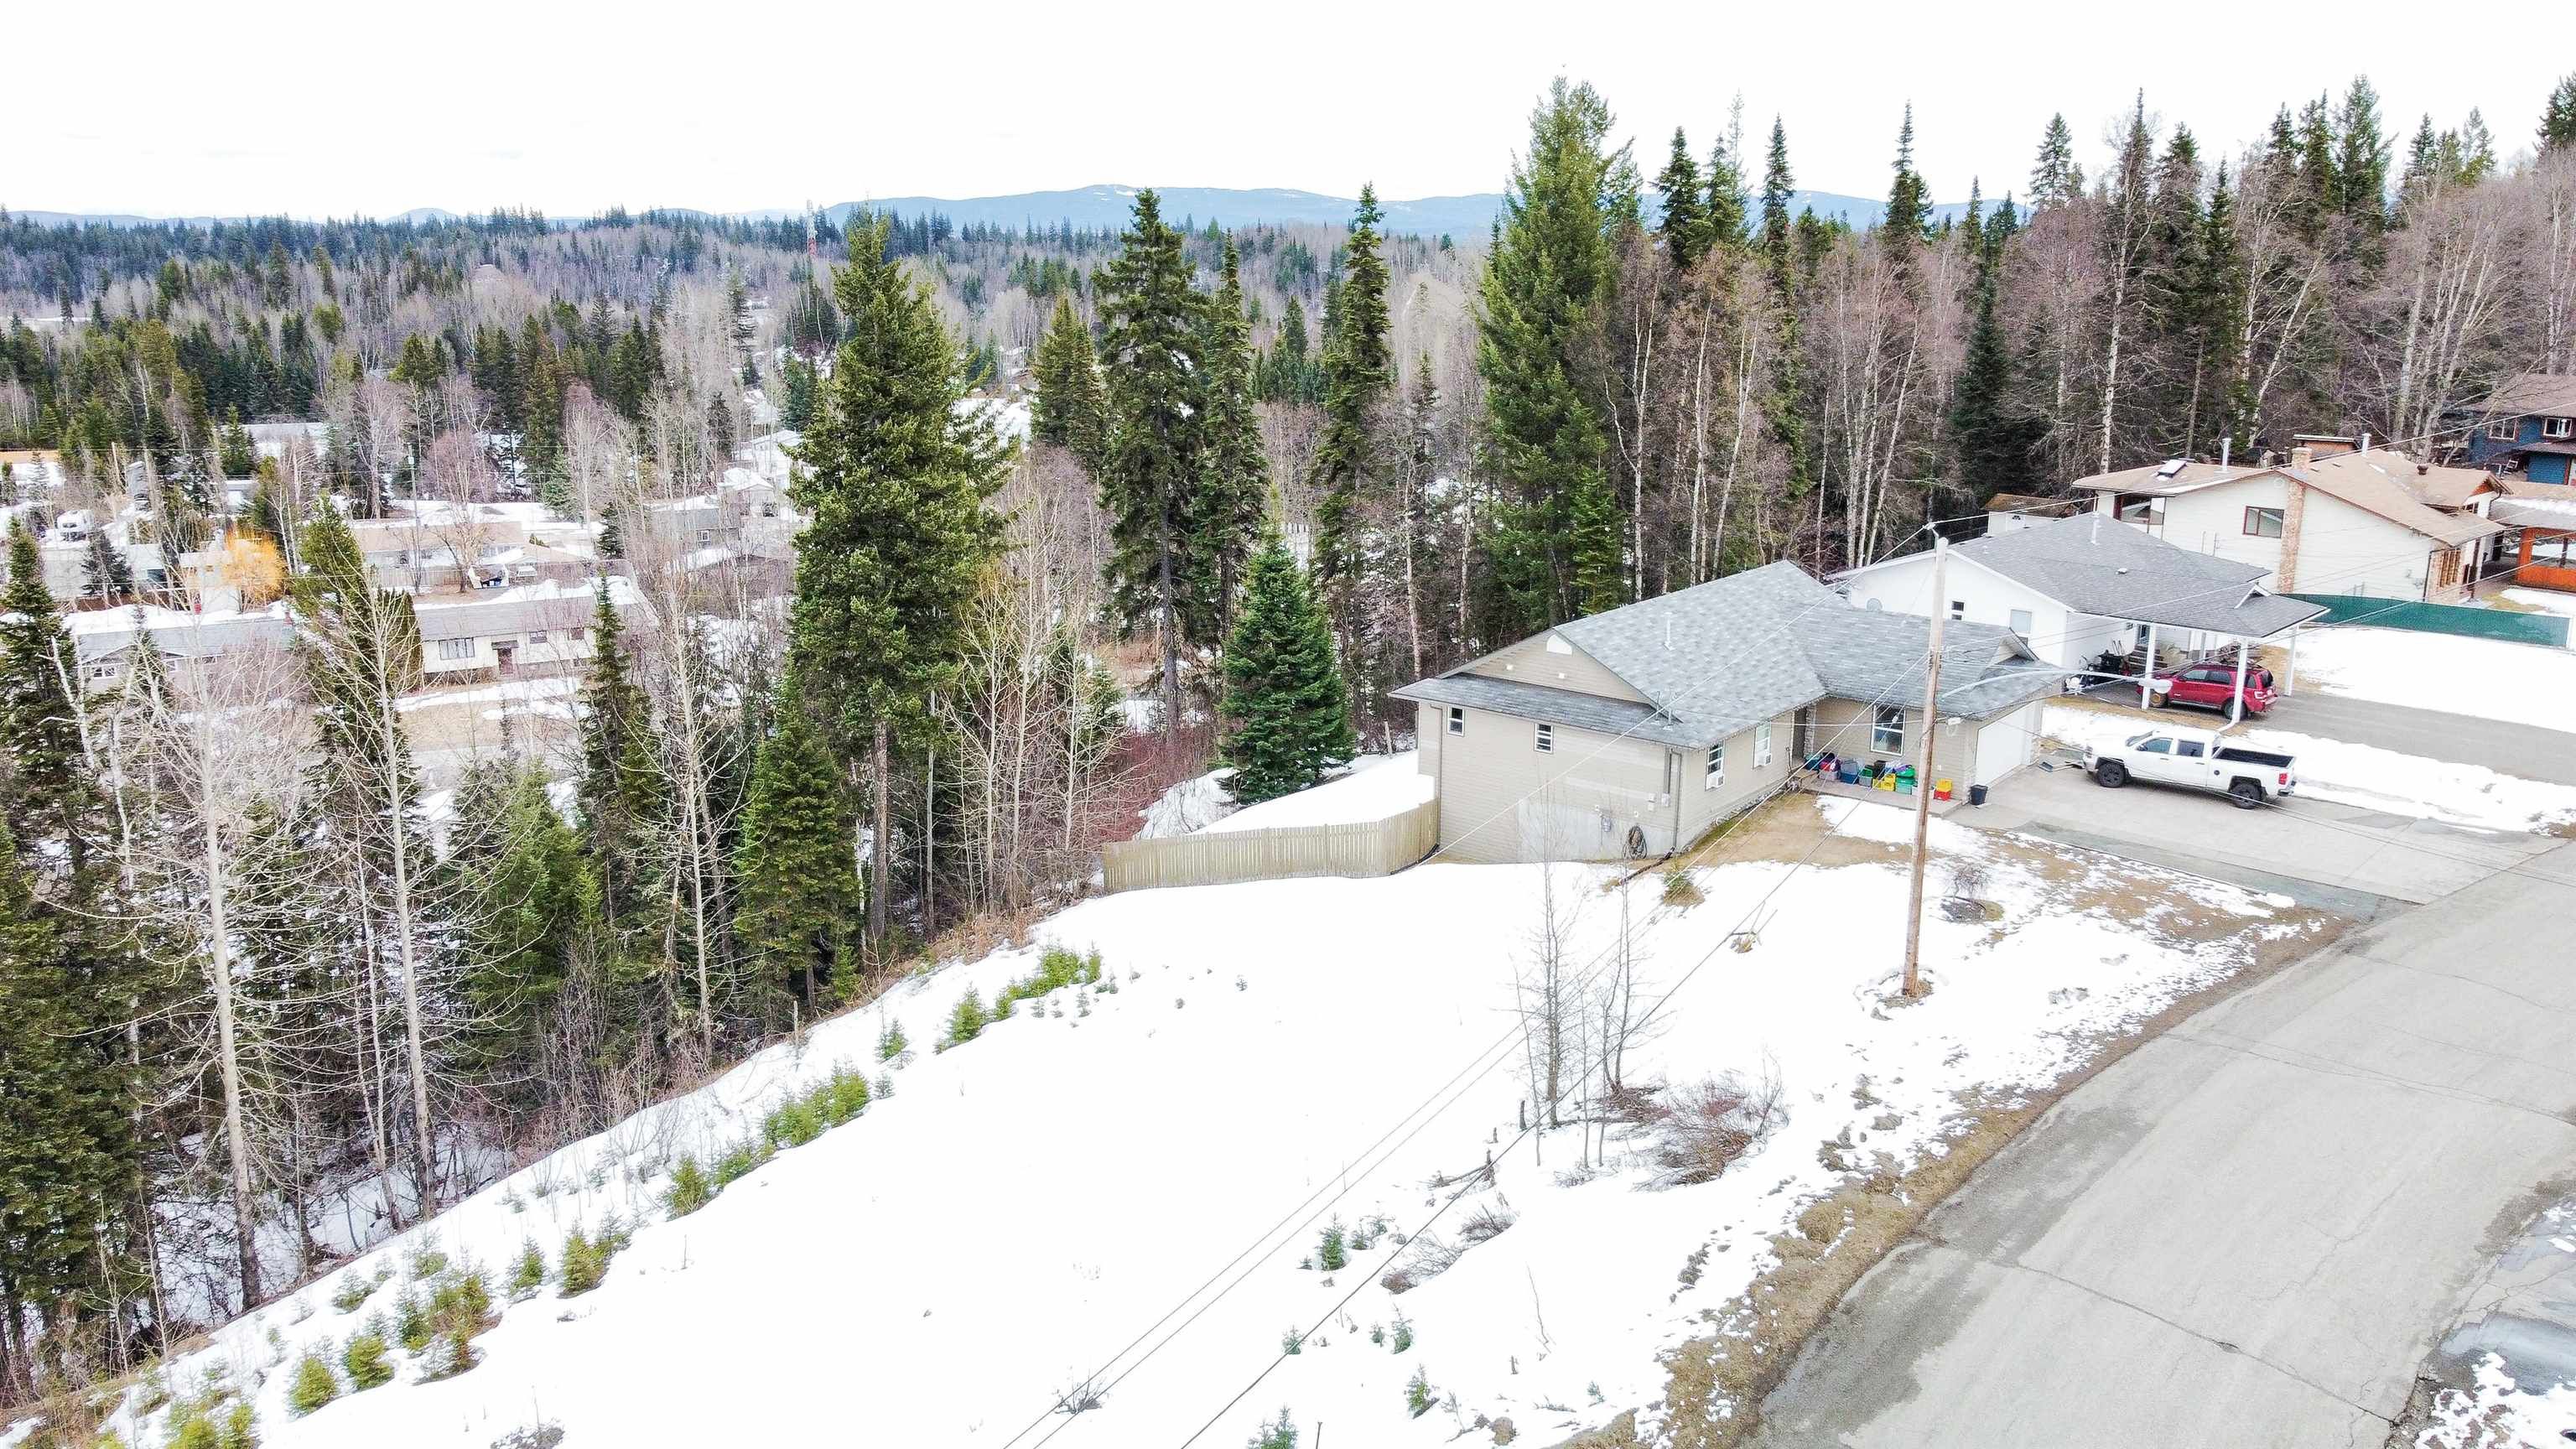 Main Photo: 2890 INGALA Drive in Prince George: Ingala Land for sale (PG City North (Zone 73))  : MLS®# R2674815